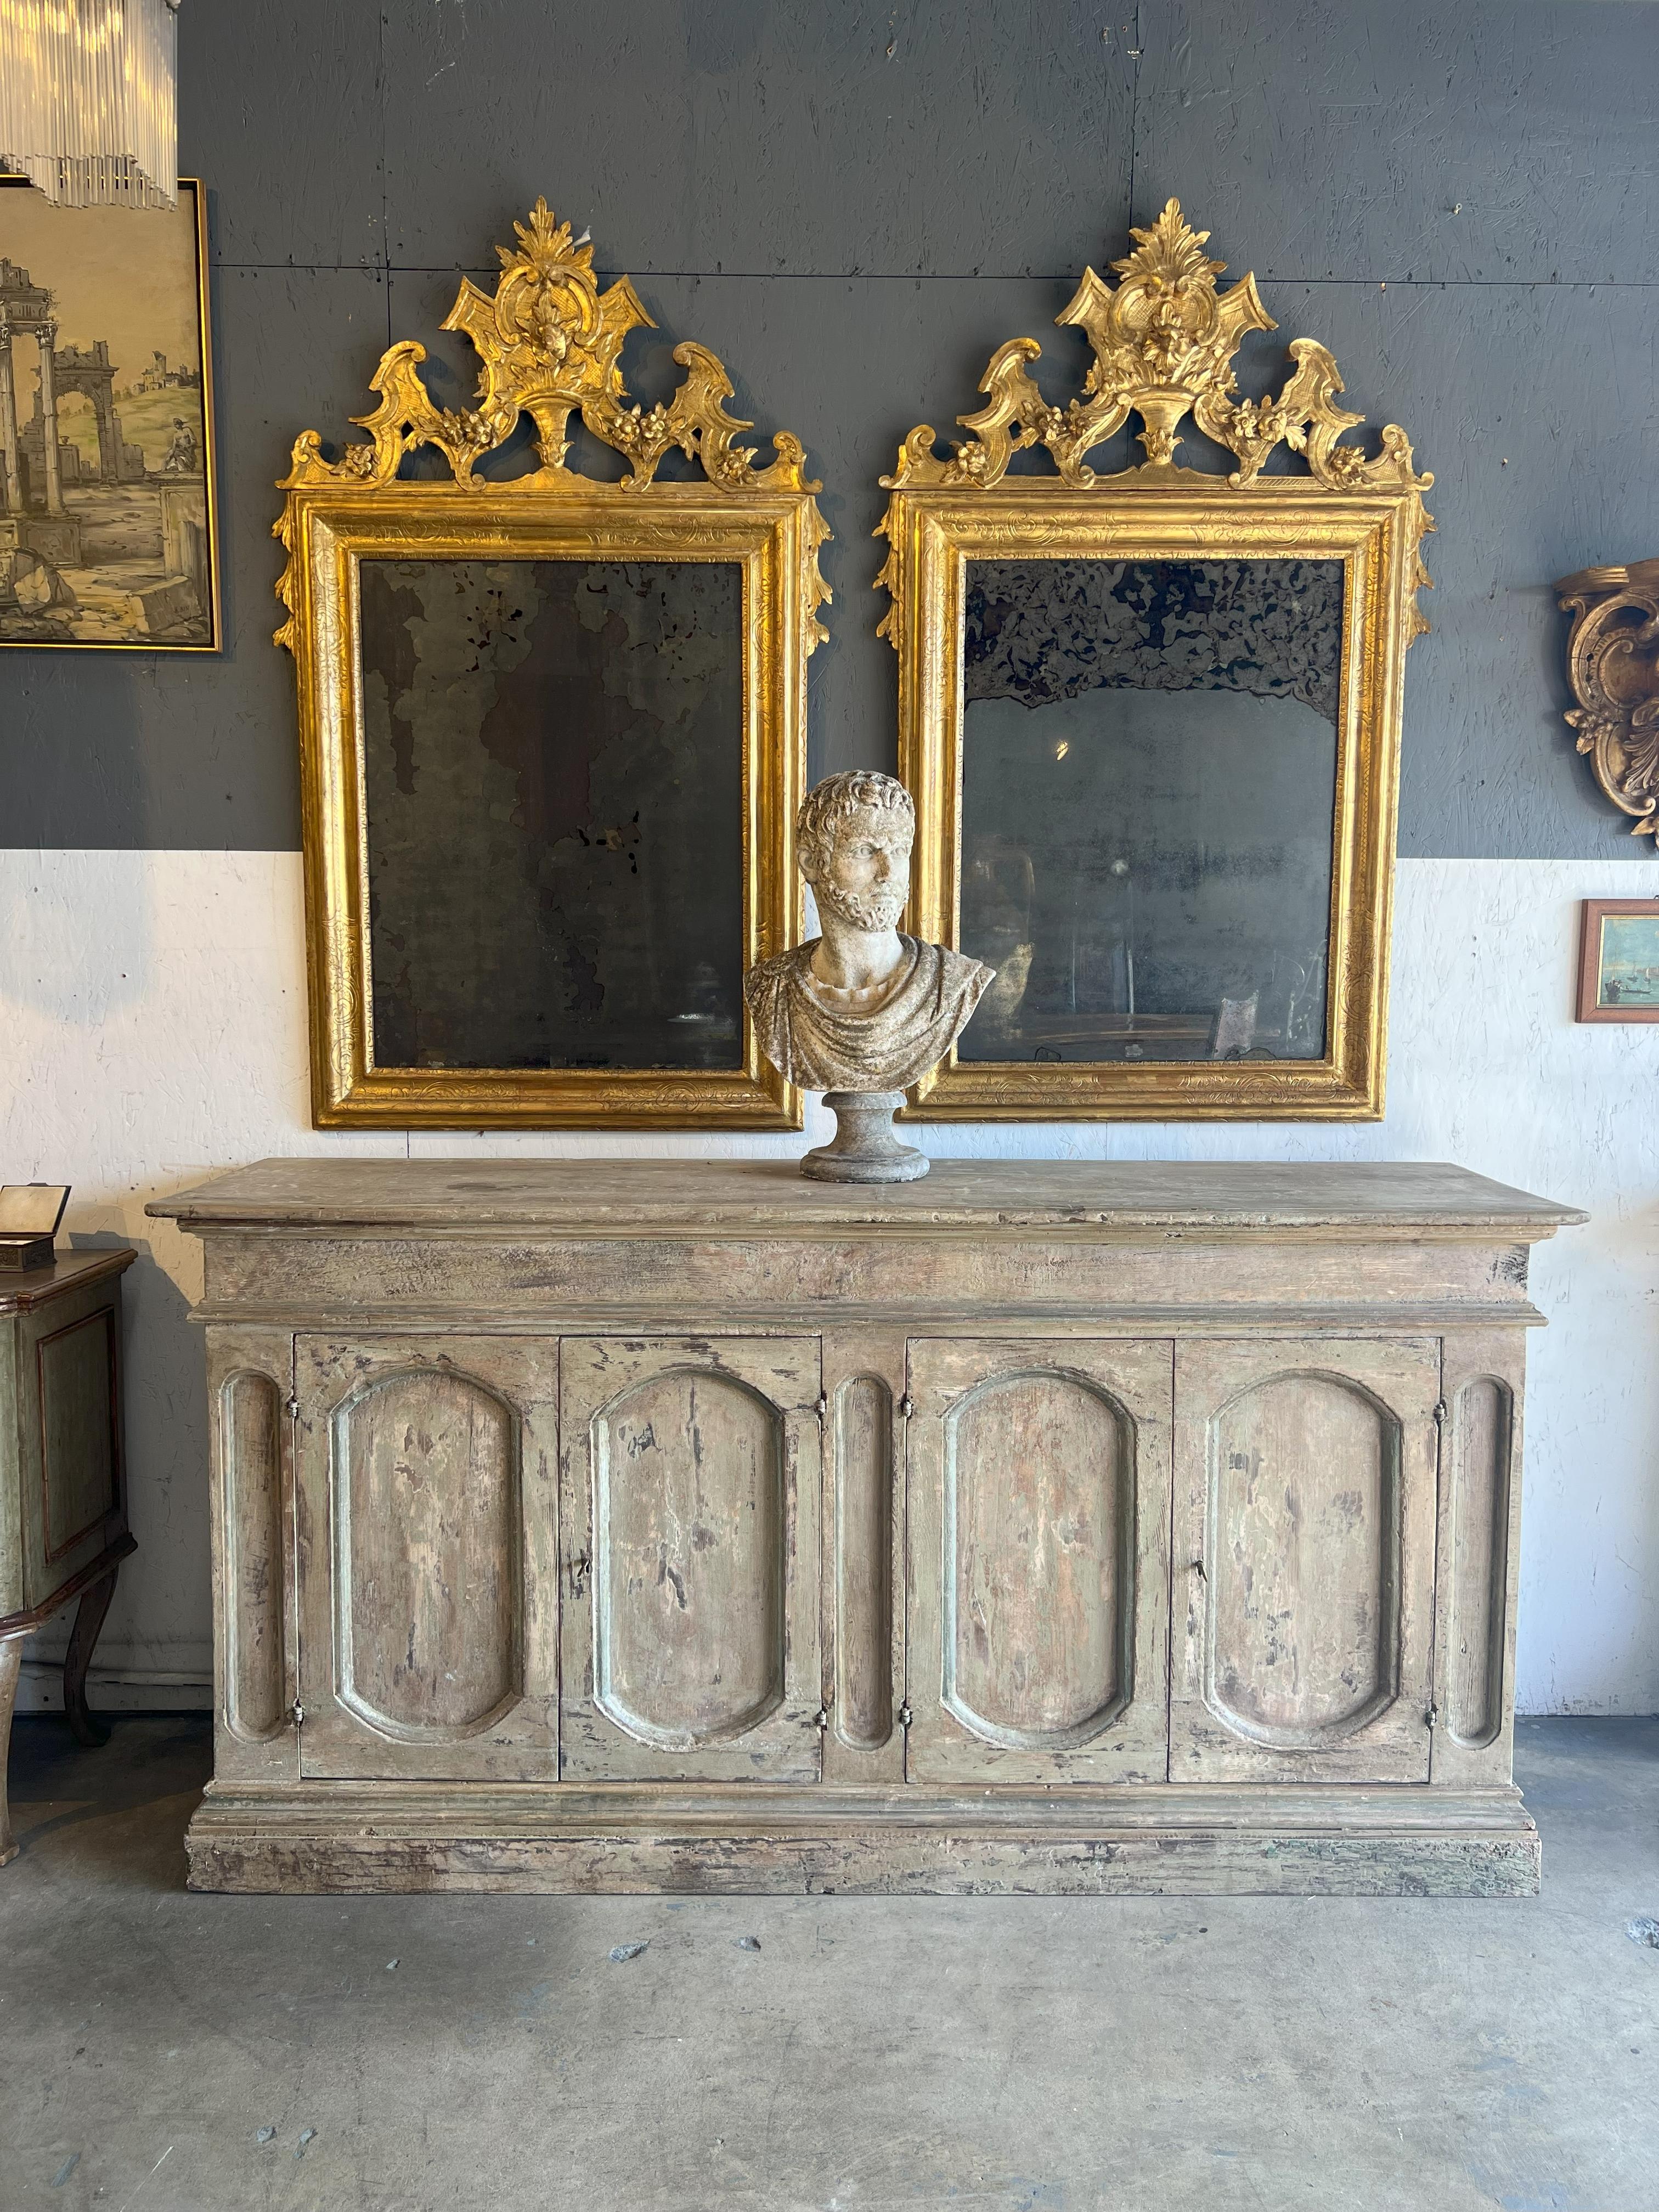 This distressed Credenza Umbra just arrived from Umbria and features a beautiful white painted distress throughout the piece. Perfect for a variety of interiors, this baroque style piece could be a beautiful focal point in any room. The color is a